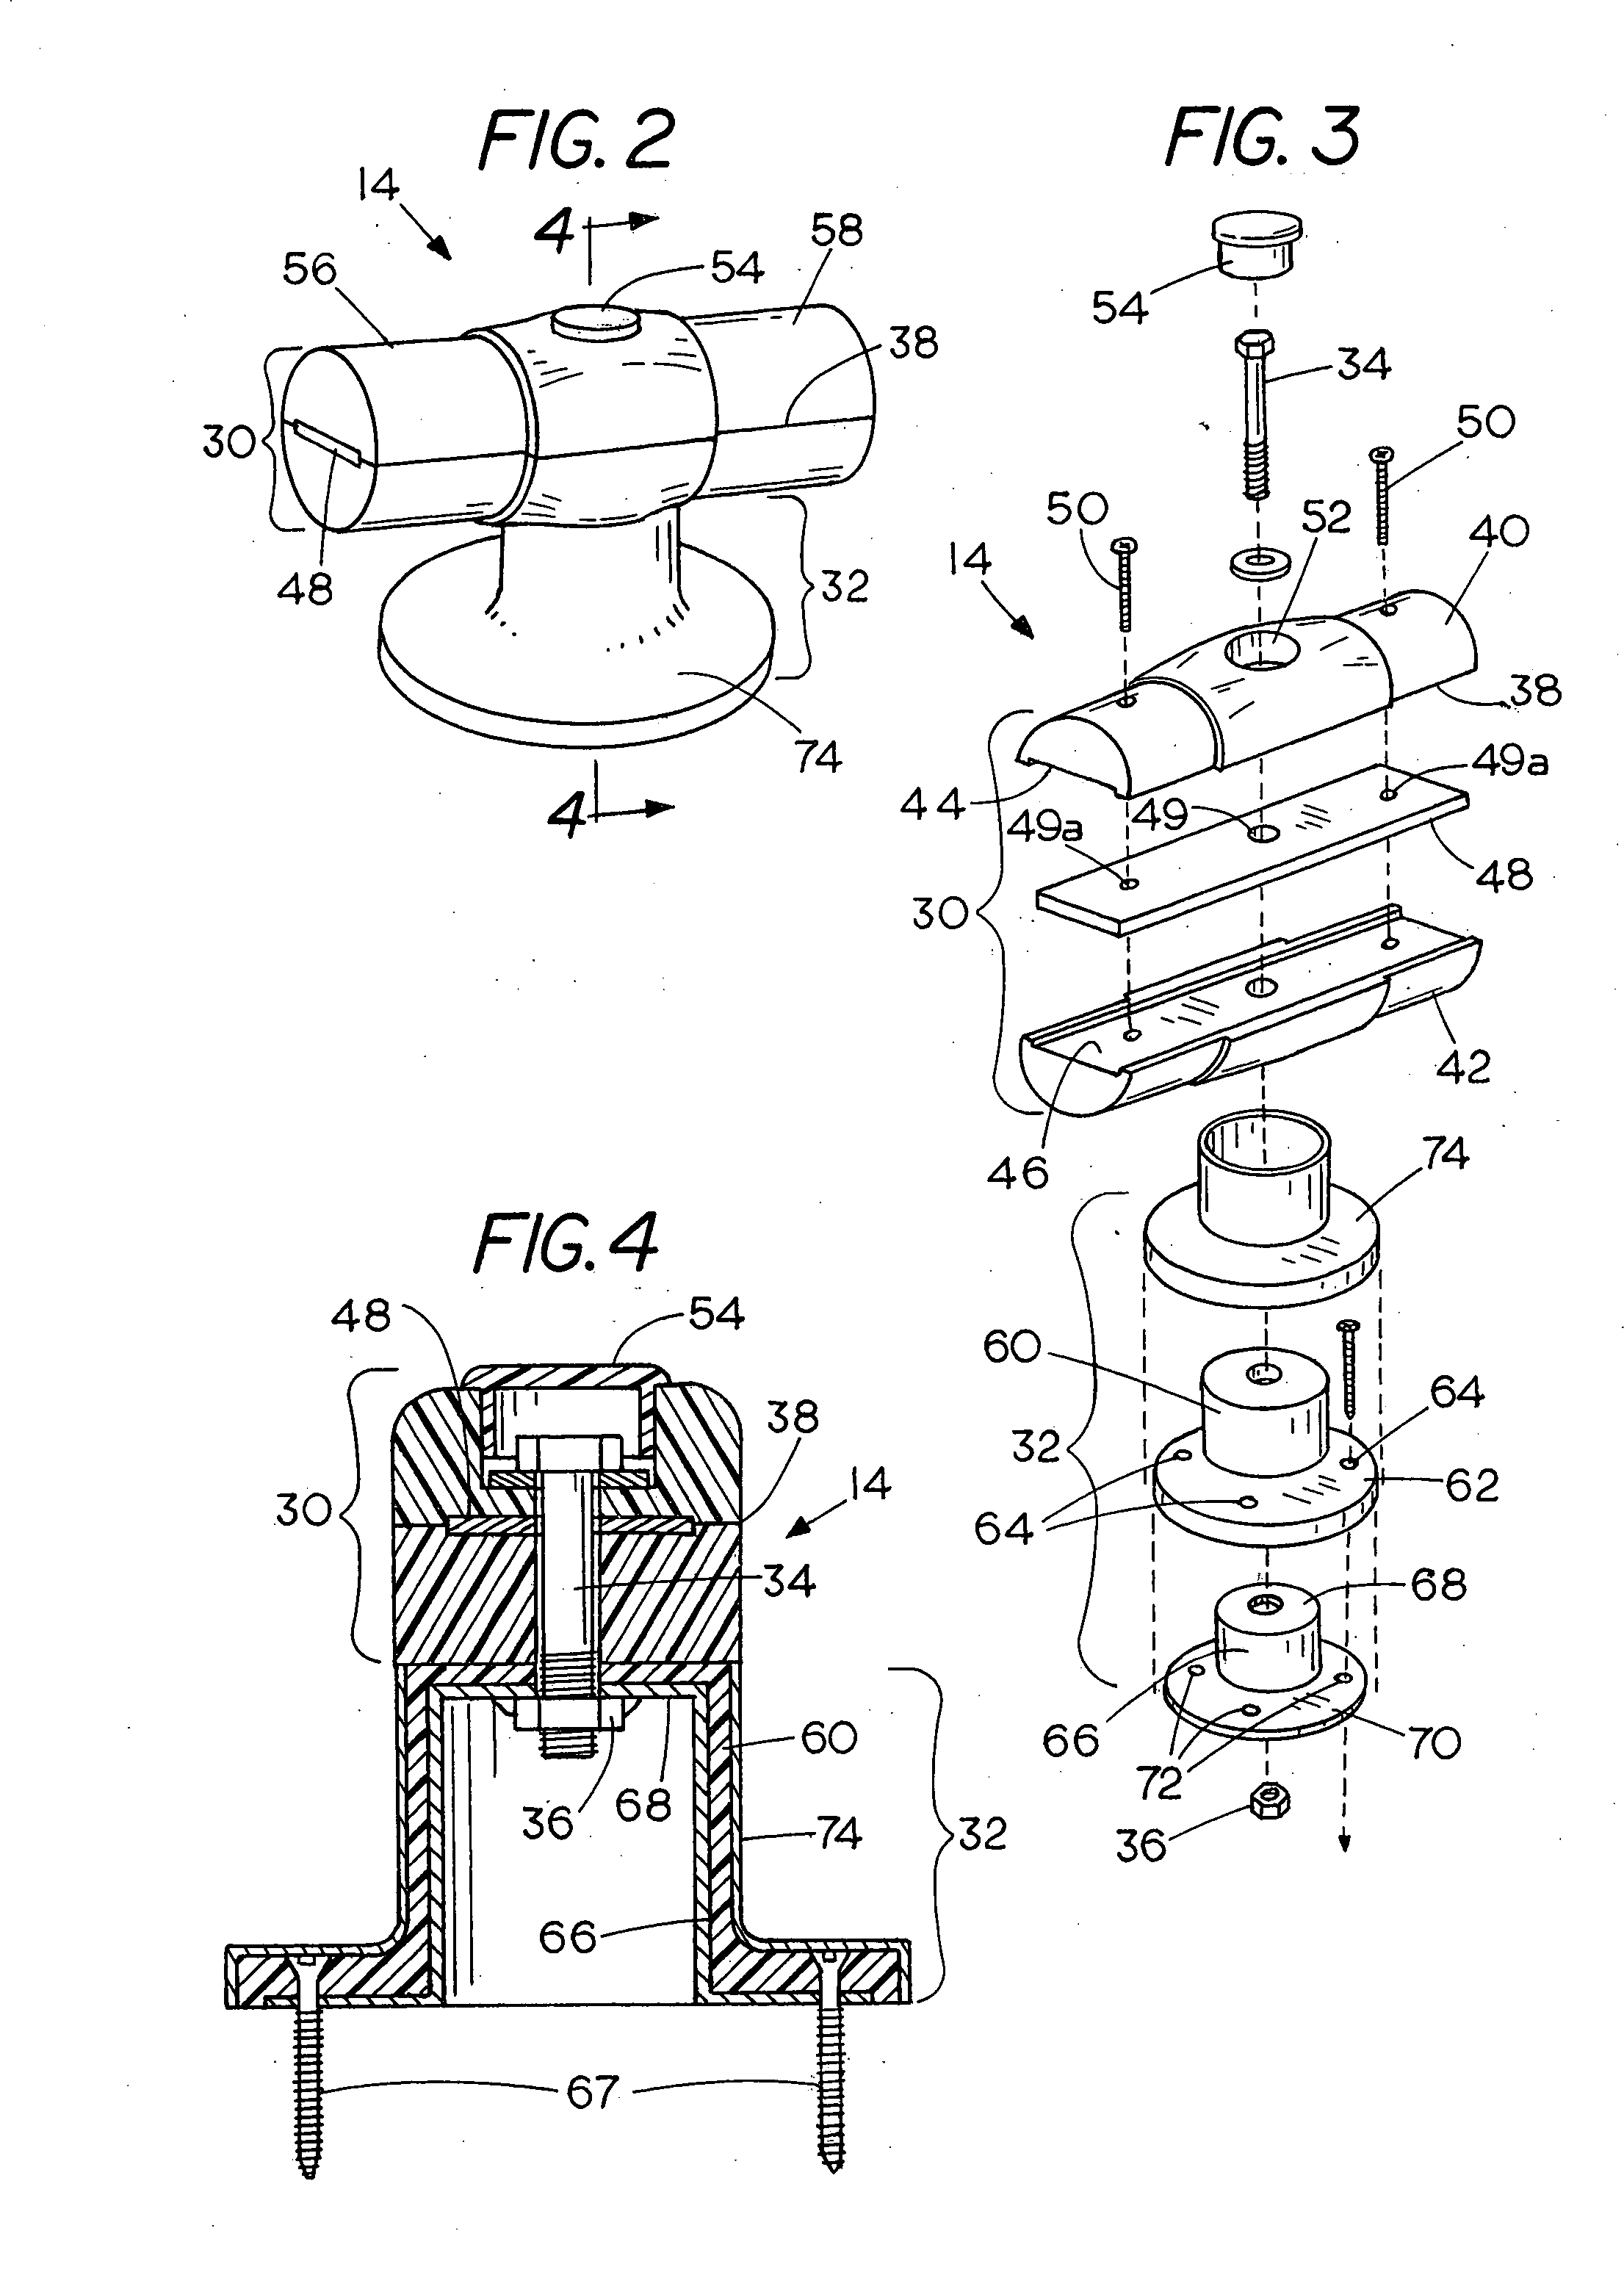 Reinforced supporting connectors for tubular grab railings